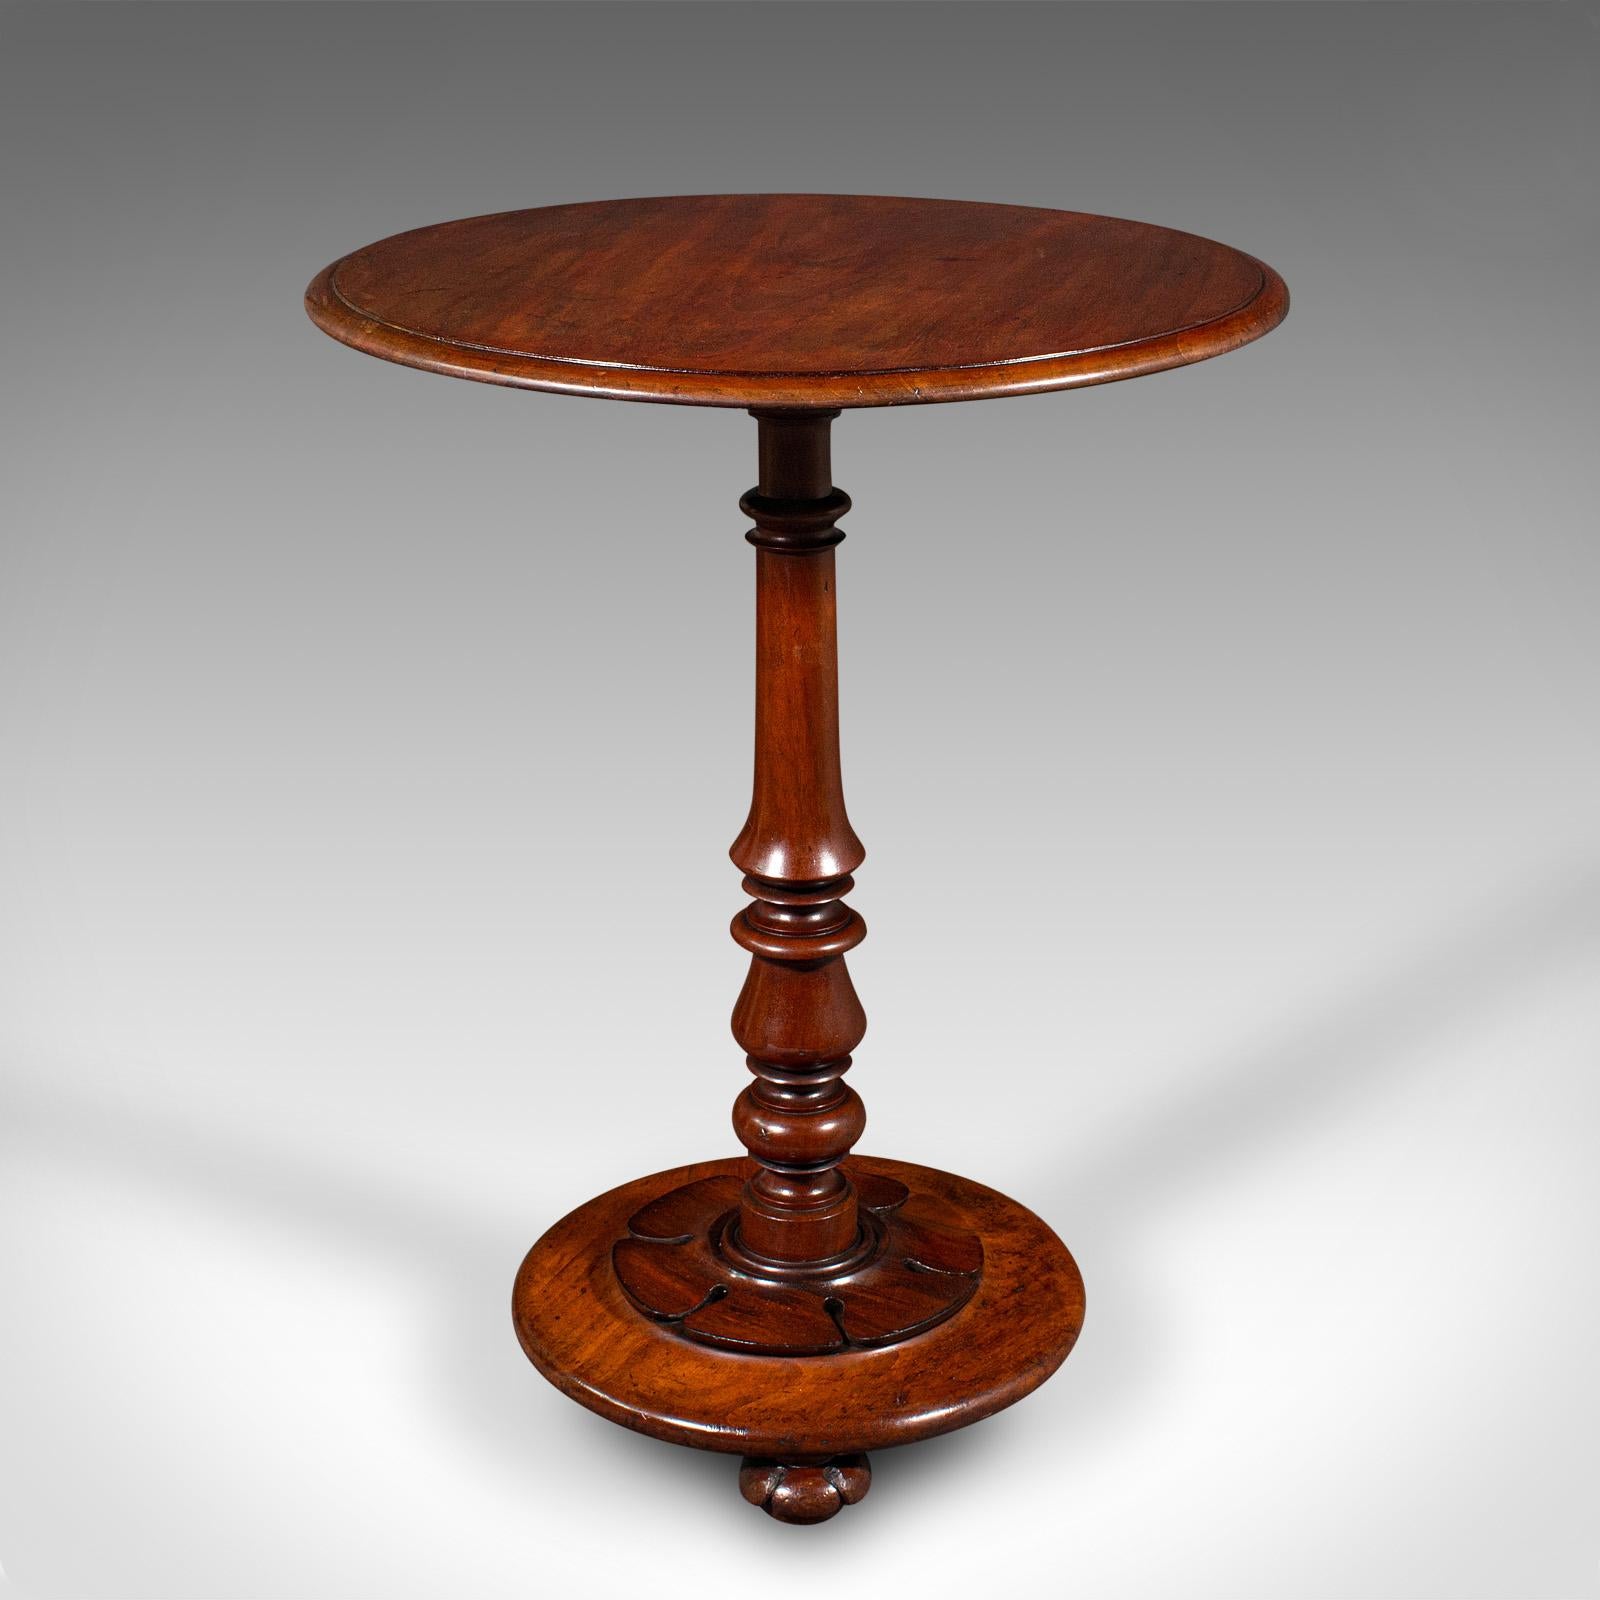 Wood Antique Tilt Top Wine Table, English, Side, Lamp, Occasional, William IV, C.1835 For Sale